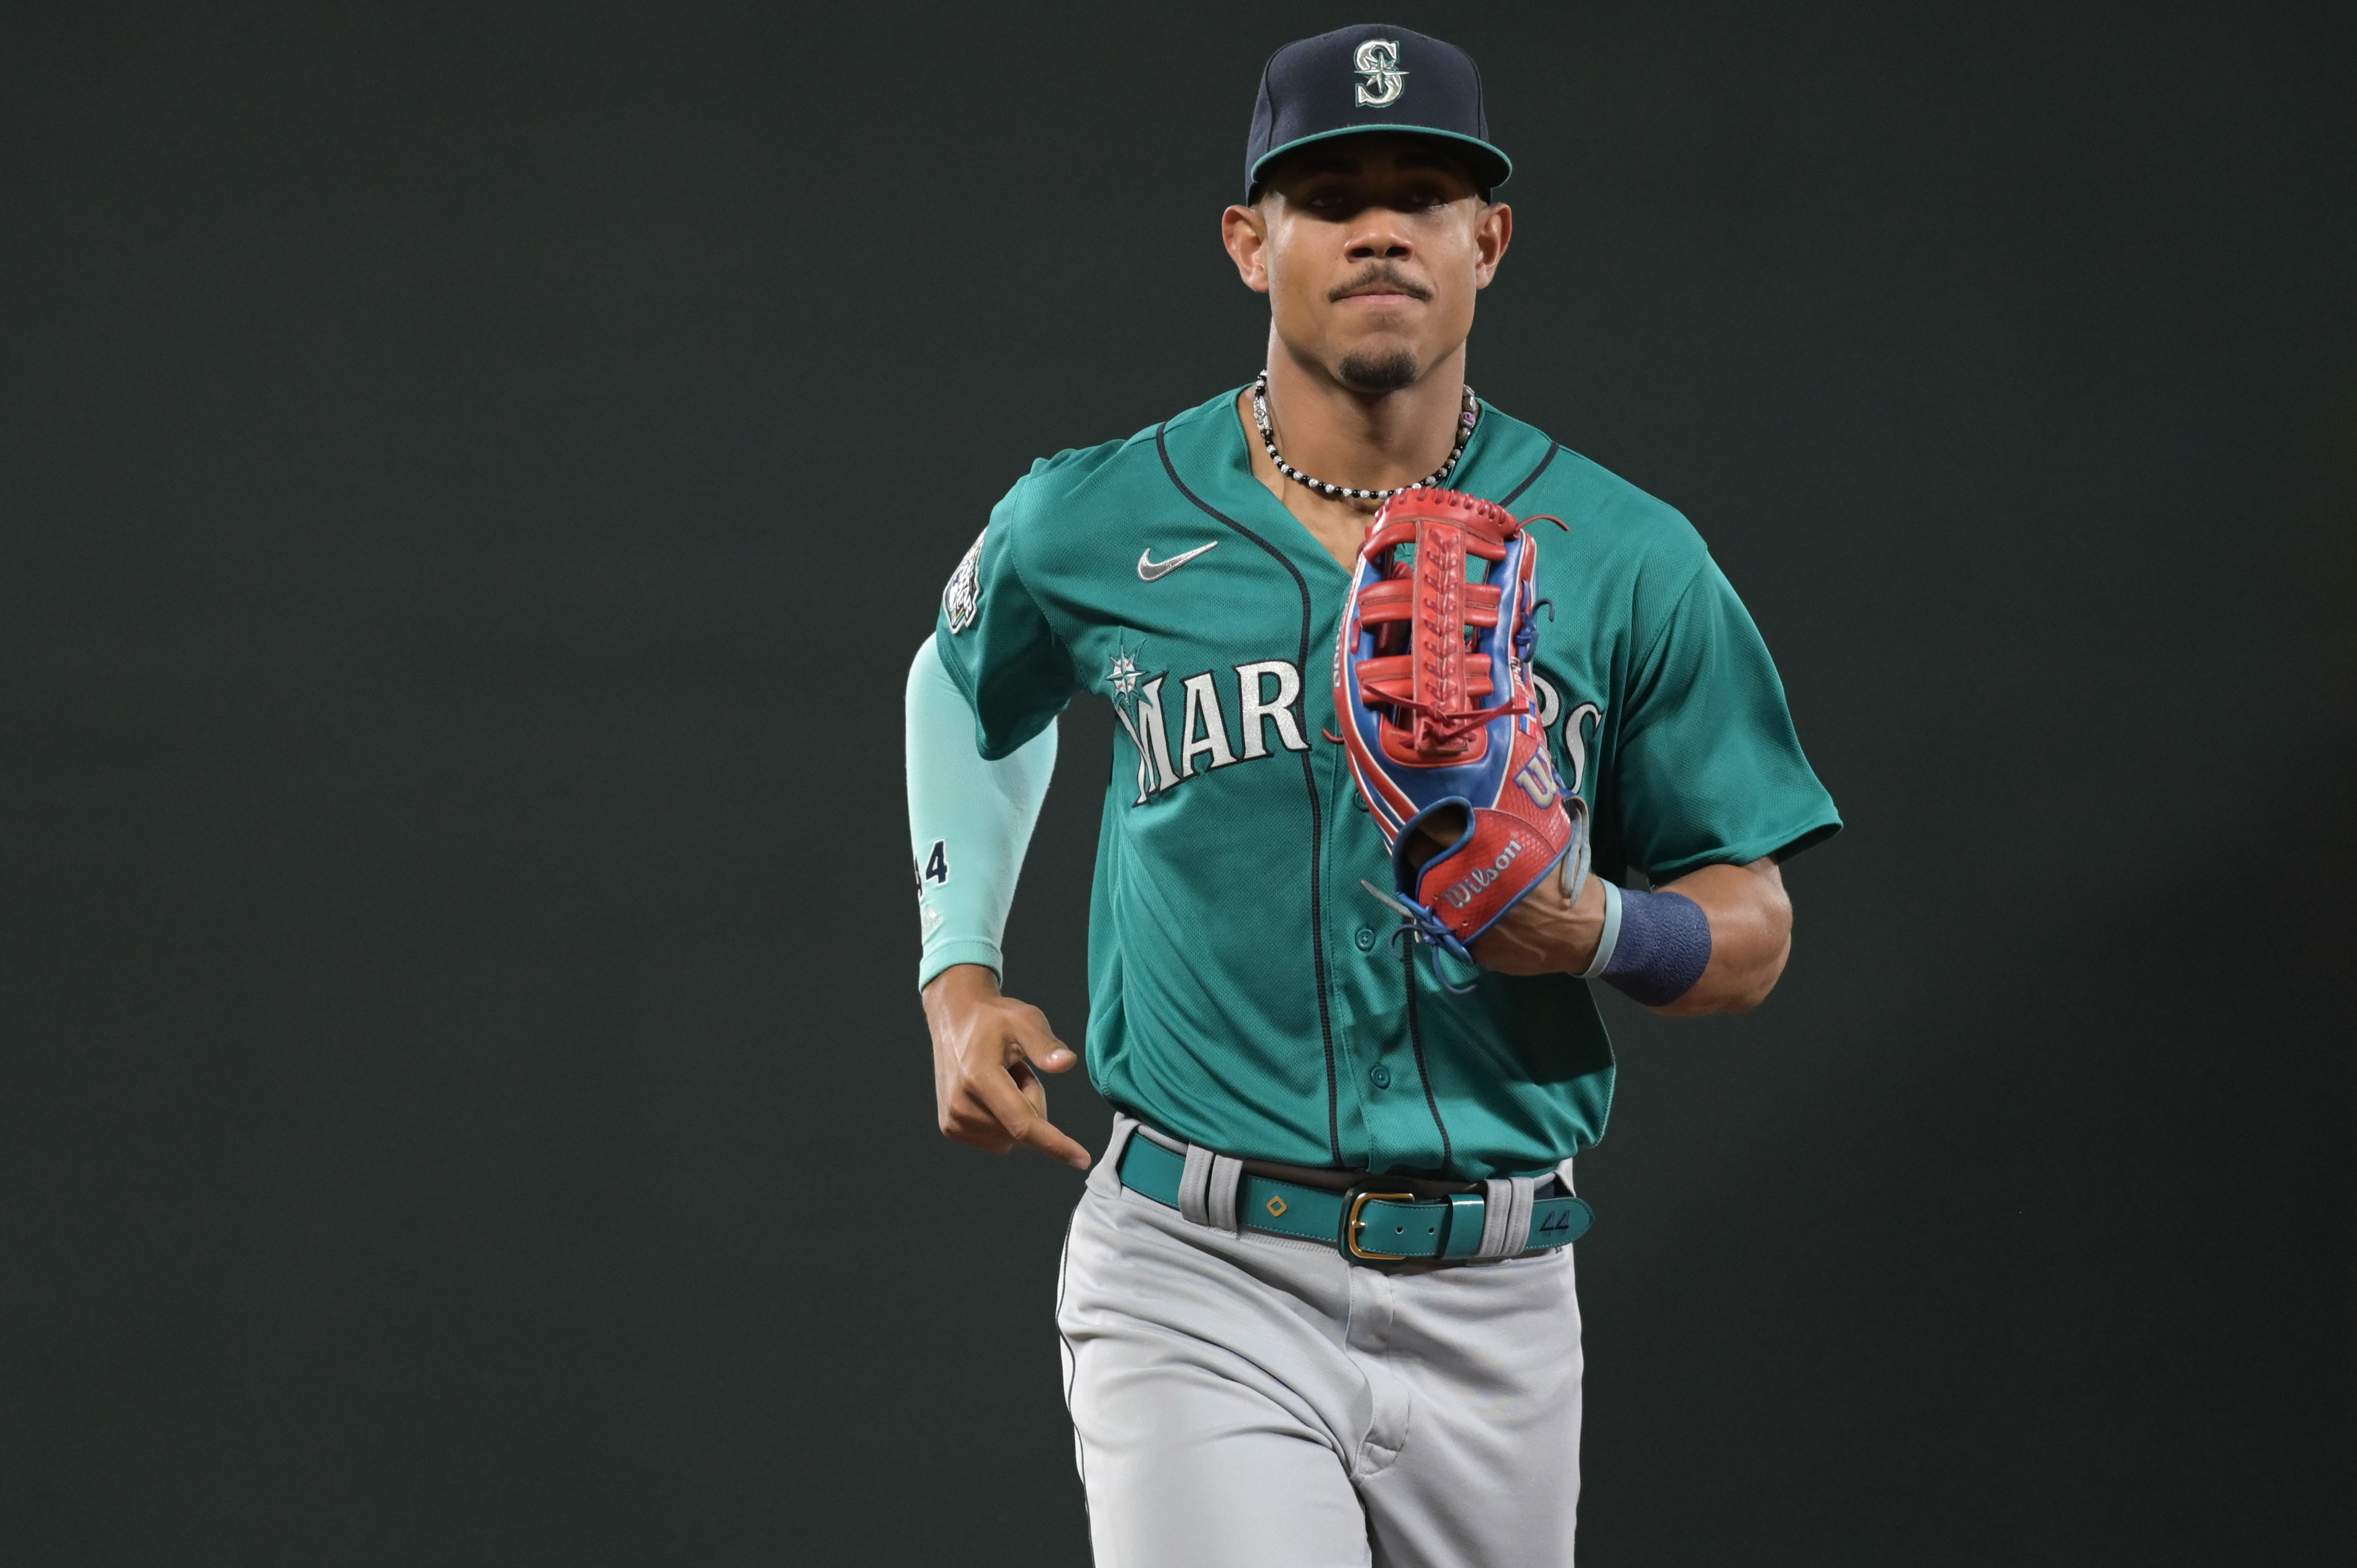 Mariners get pitching, hitting in 13-1 drubbing of Orioles